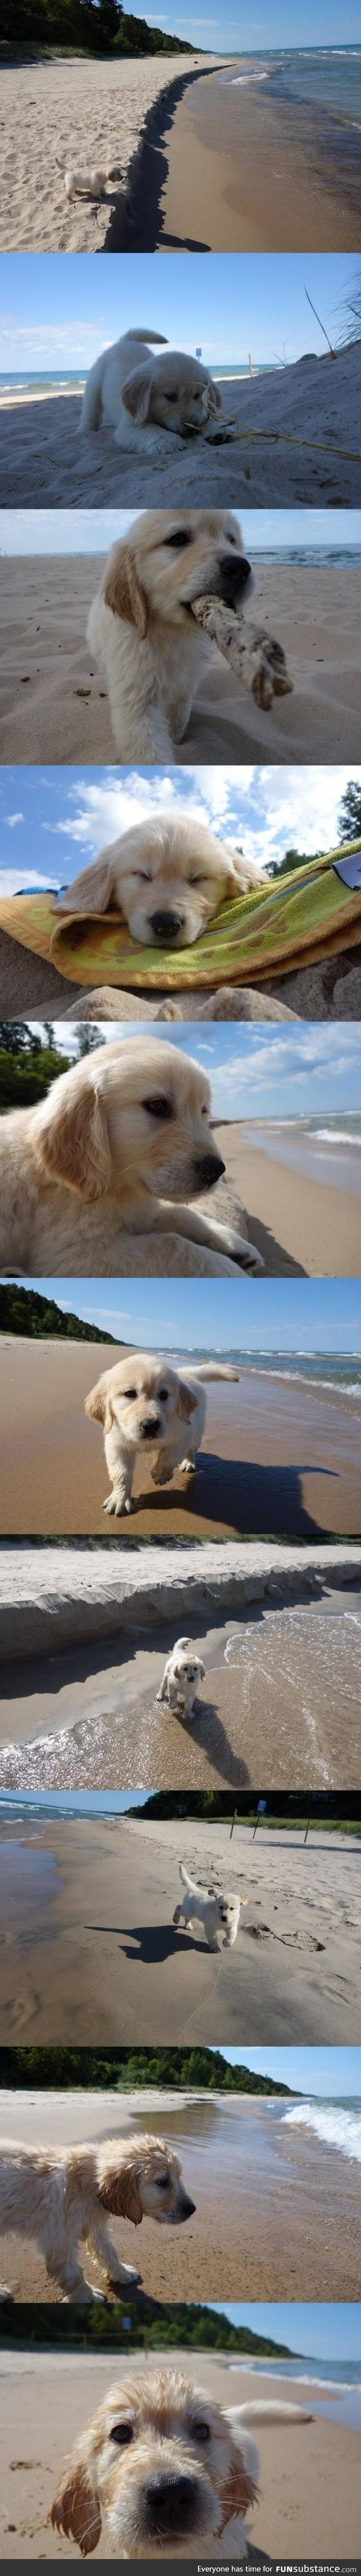 First trip to the beach? That's golden!